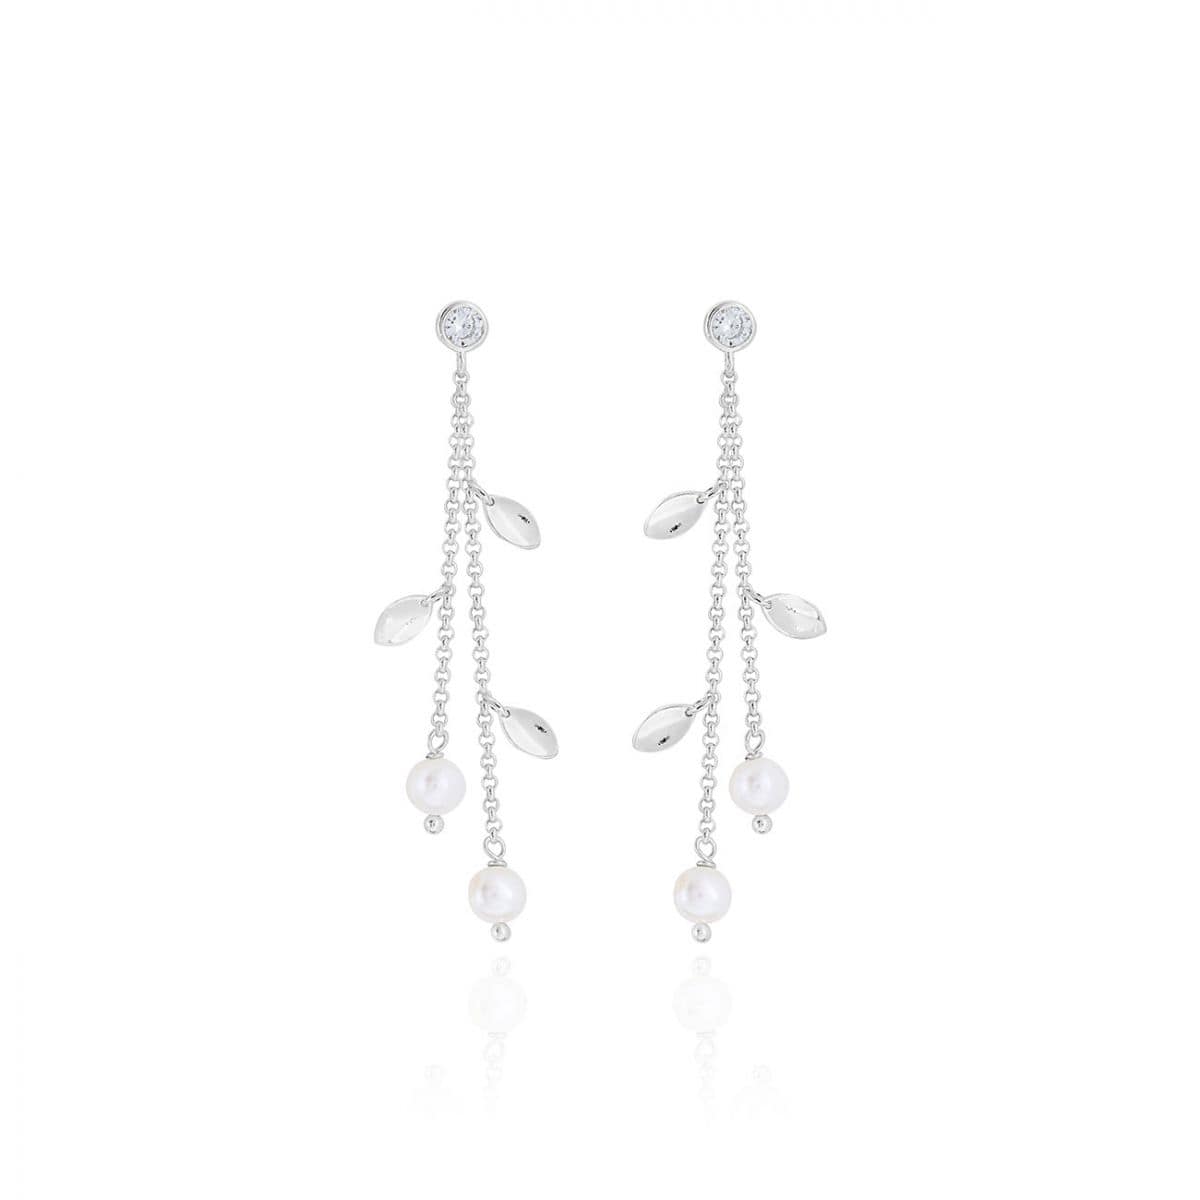 Joma Jewellery Earrings Joma Jewellery Happily Ever After Bridal Boxed Earrings - Pearl C/Z Leaf